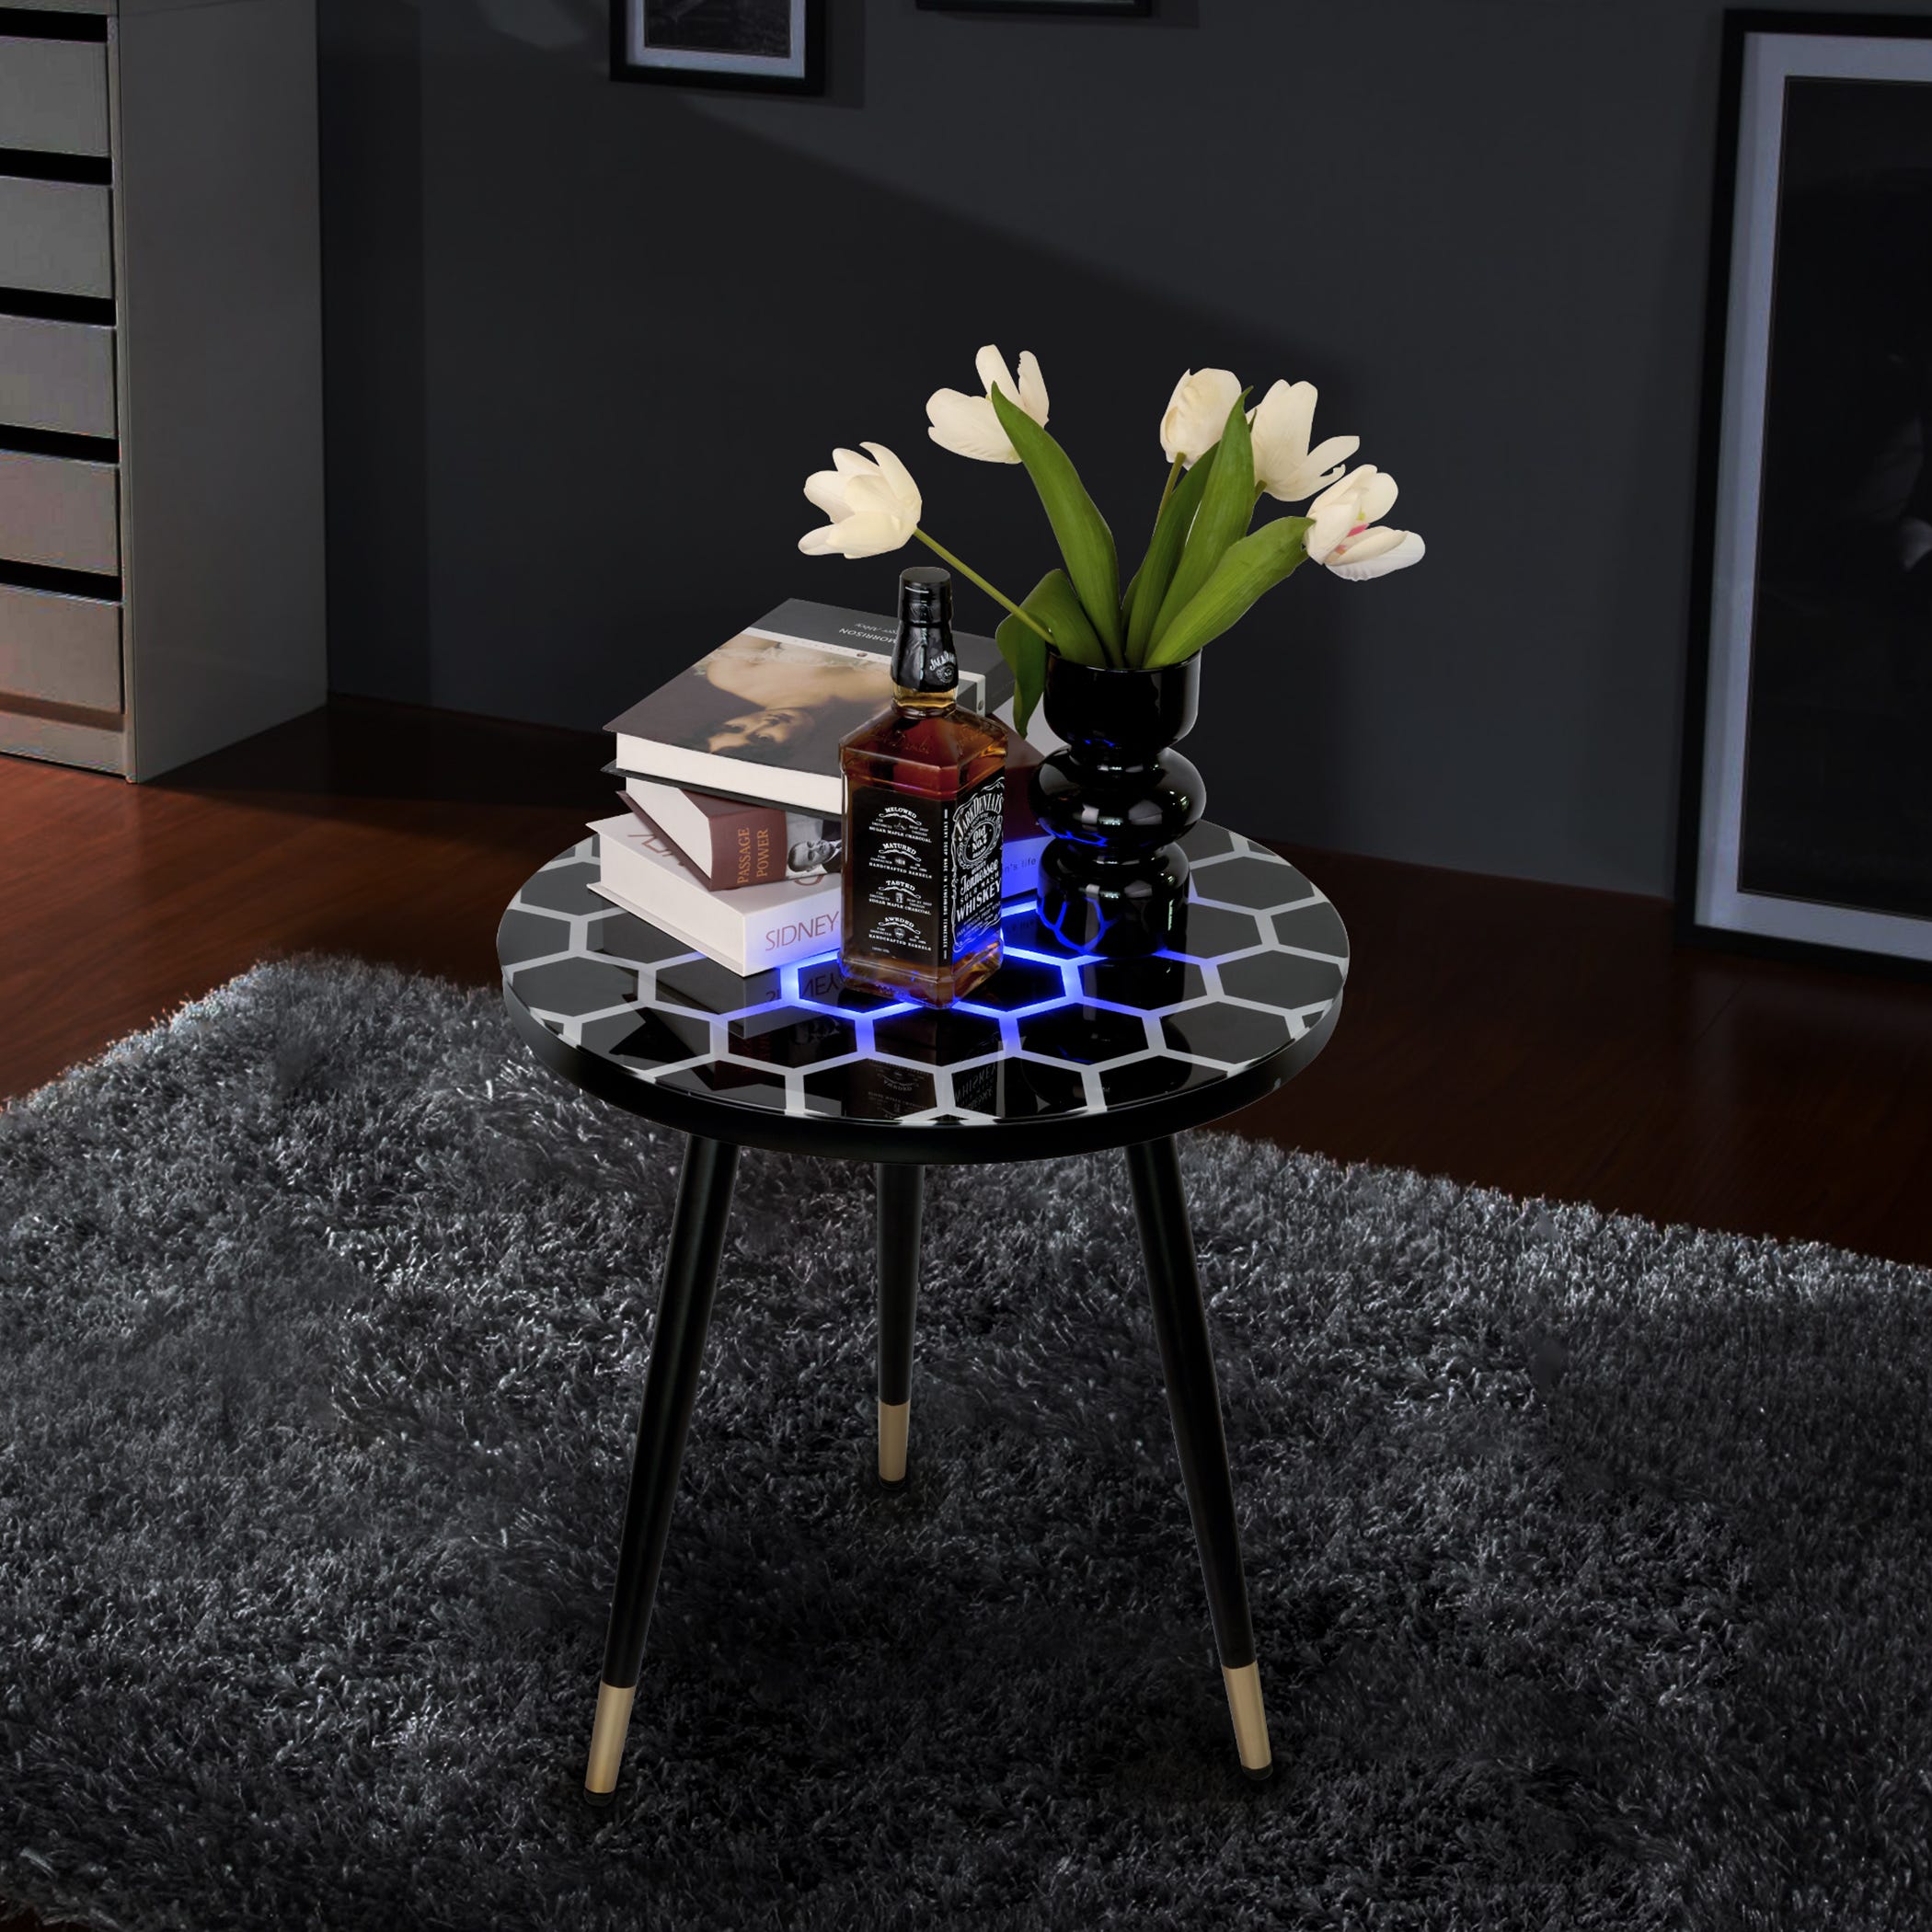 A round side table with a hexagonal patterned top, illuminated with blue LED lights, displaying books, a black vase with white tulips, and a cologne bottle.